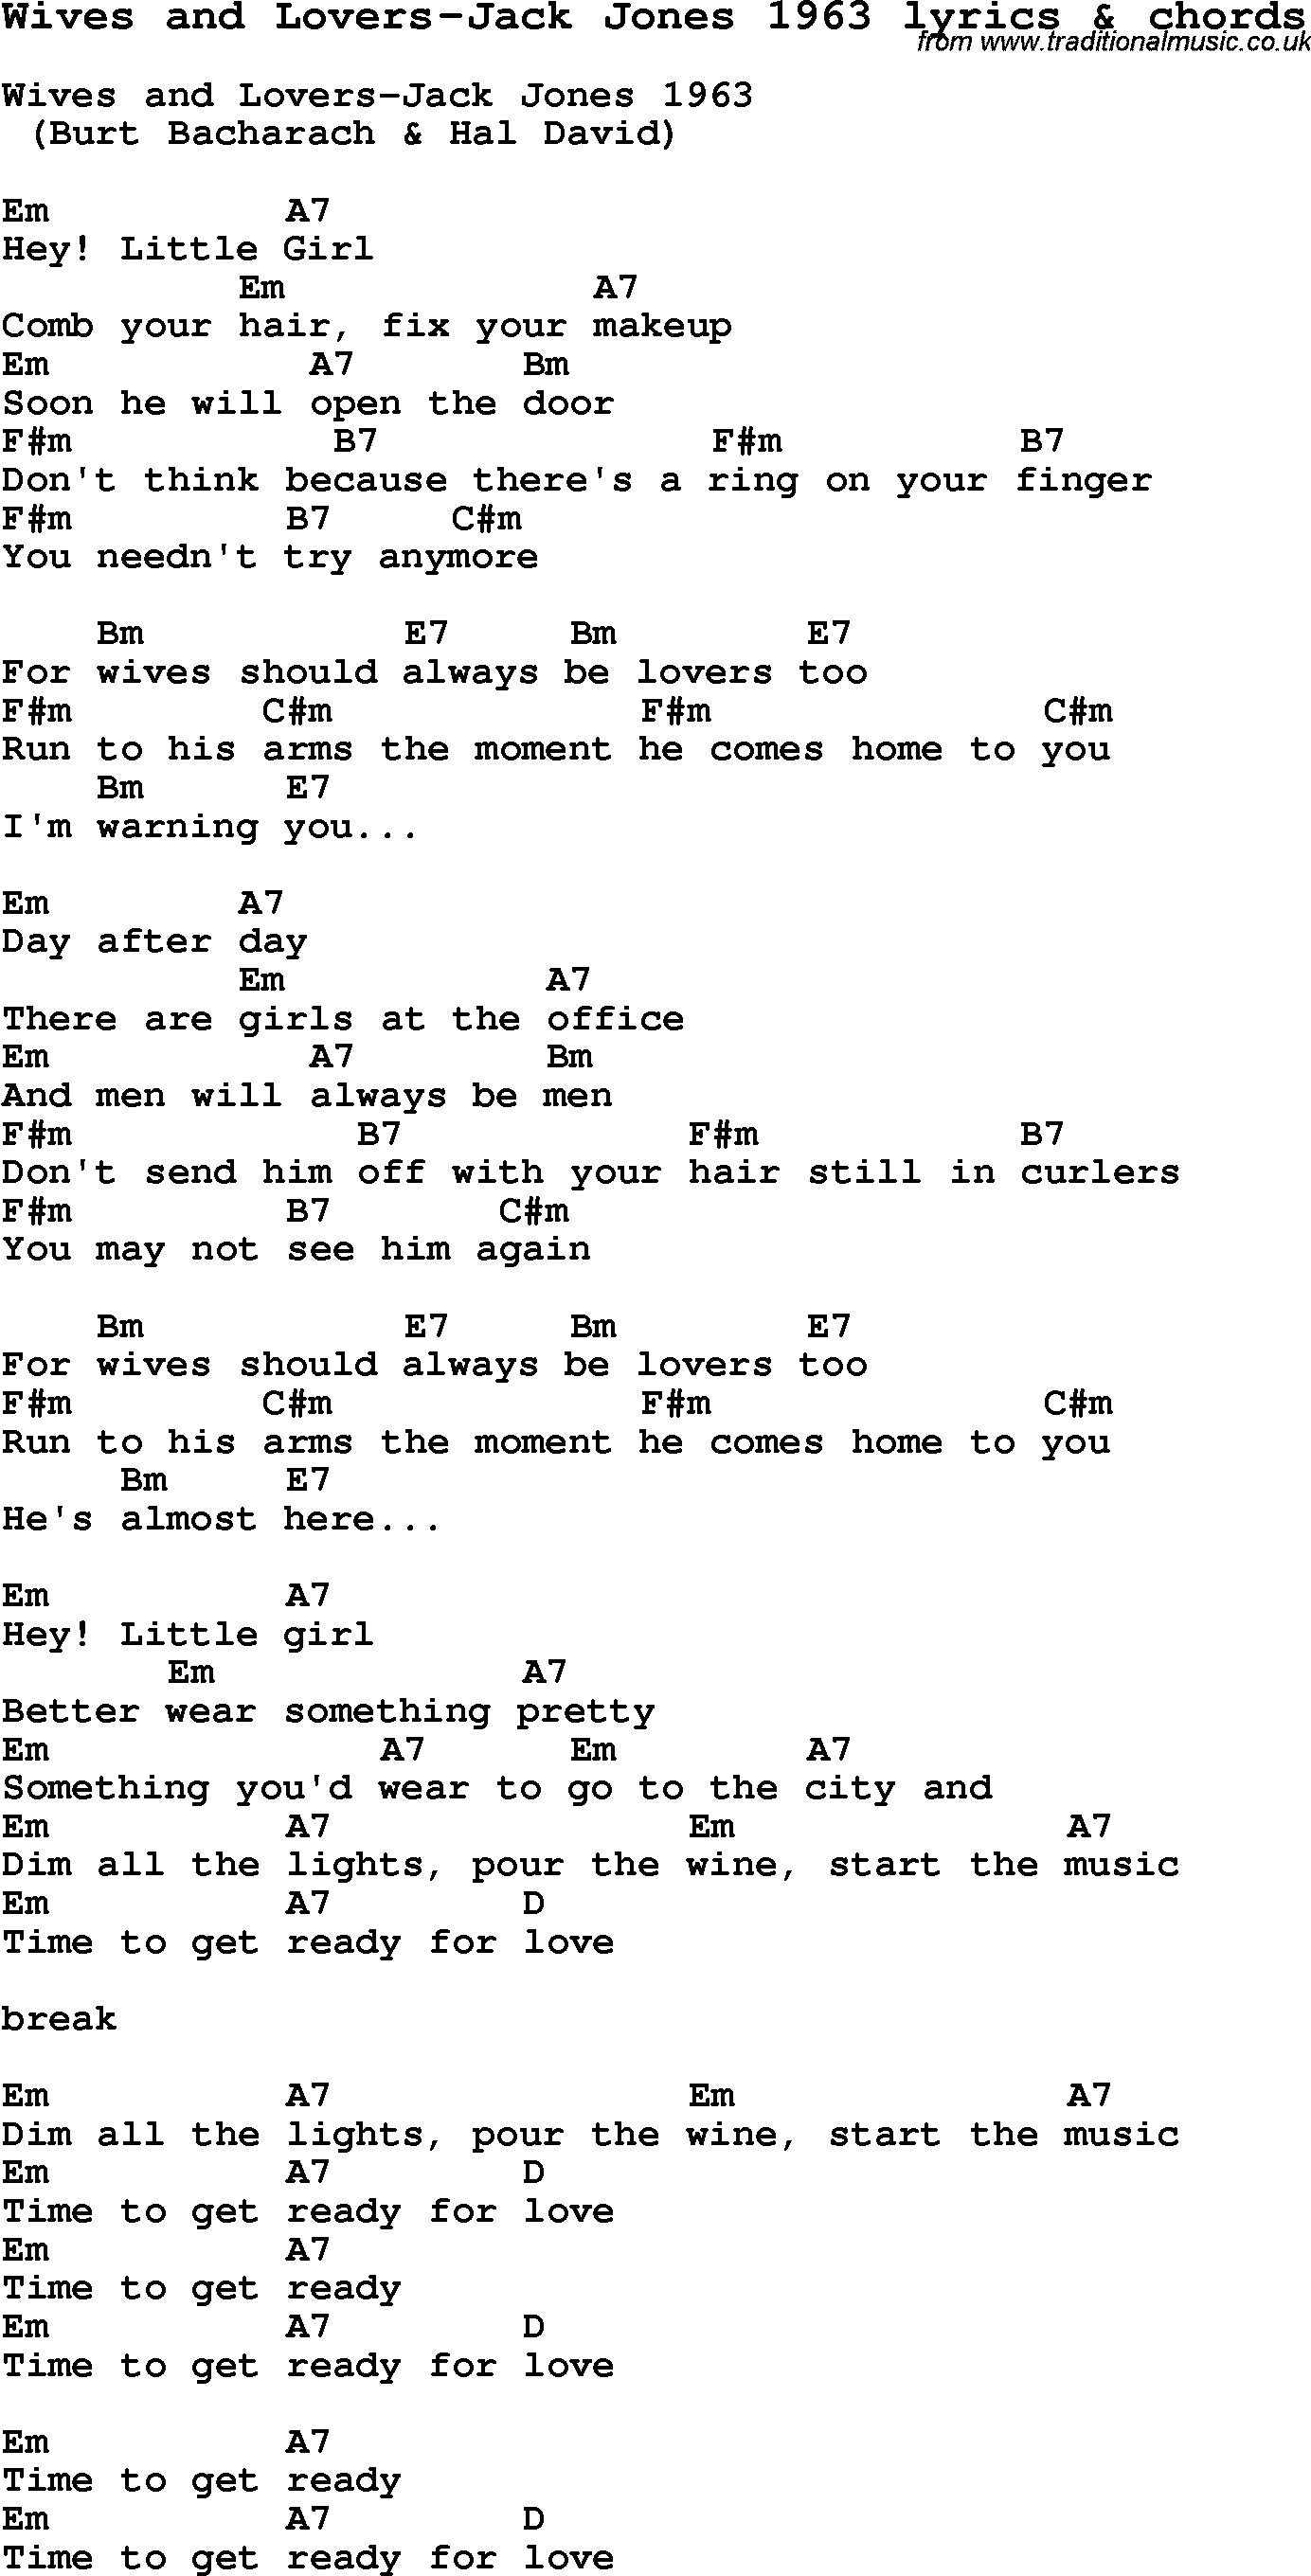 Love Song Lyrics for: Wives and Lovers-Jack Jones 1963 with chords for Ukulele, Guitar Banjo etc.